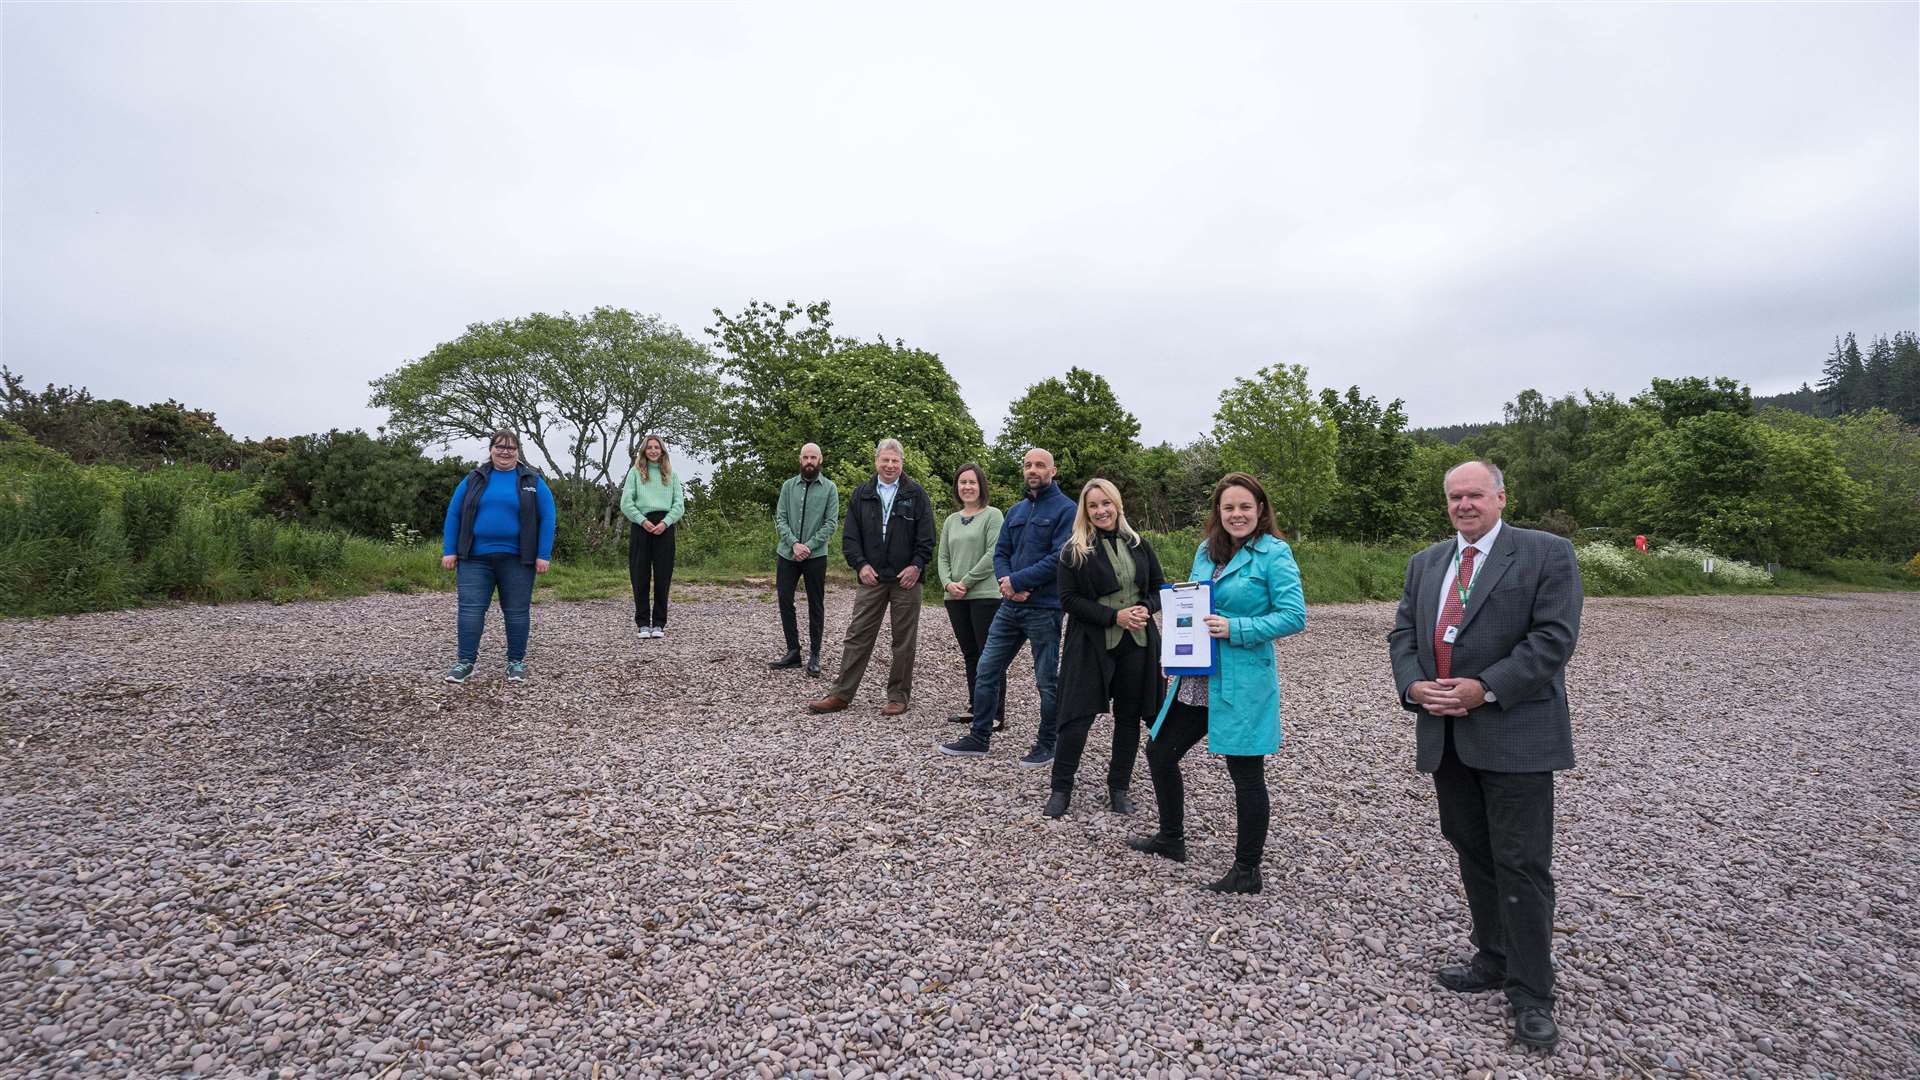 (left to right): Bryony Beck, Destination Development Manager, VILN; Katie Andrews, Climate Change Coordinator, Highland Council; Martin MacDonald, Project Manager, Highland Council; David Haas, Inverness City Area Manager, Highland Council; Anna Miller, Head of Tourism, HIE; Emmanuel Dambier, Board Member, VILN; Jo De Sylva, Chair of VILN; Kate Forbes MSP; and Charles Stephen, Loch Ness Ward Manager.